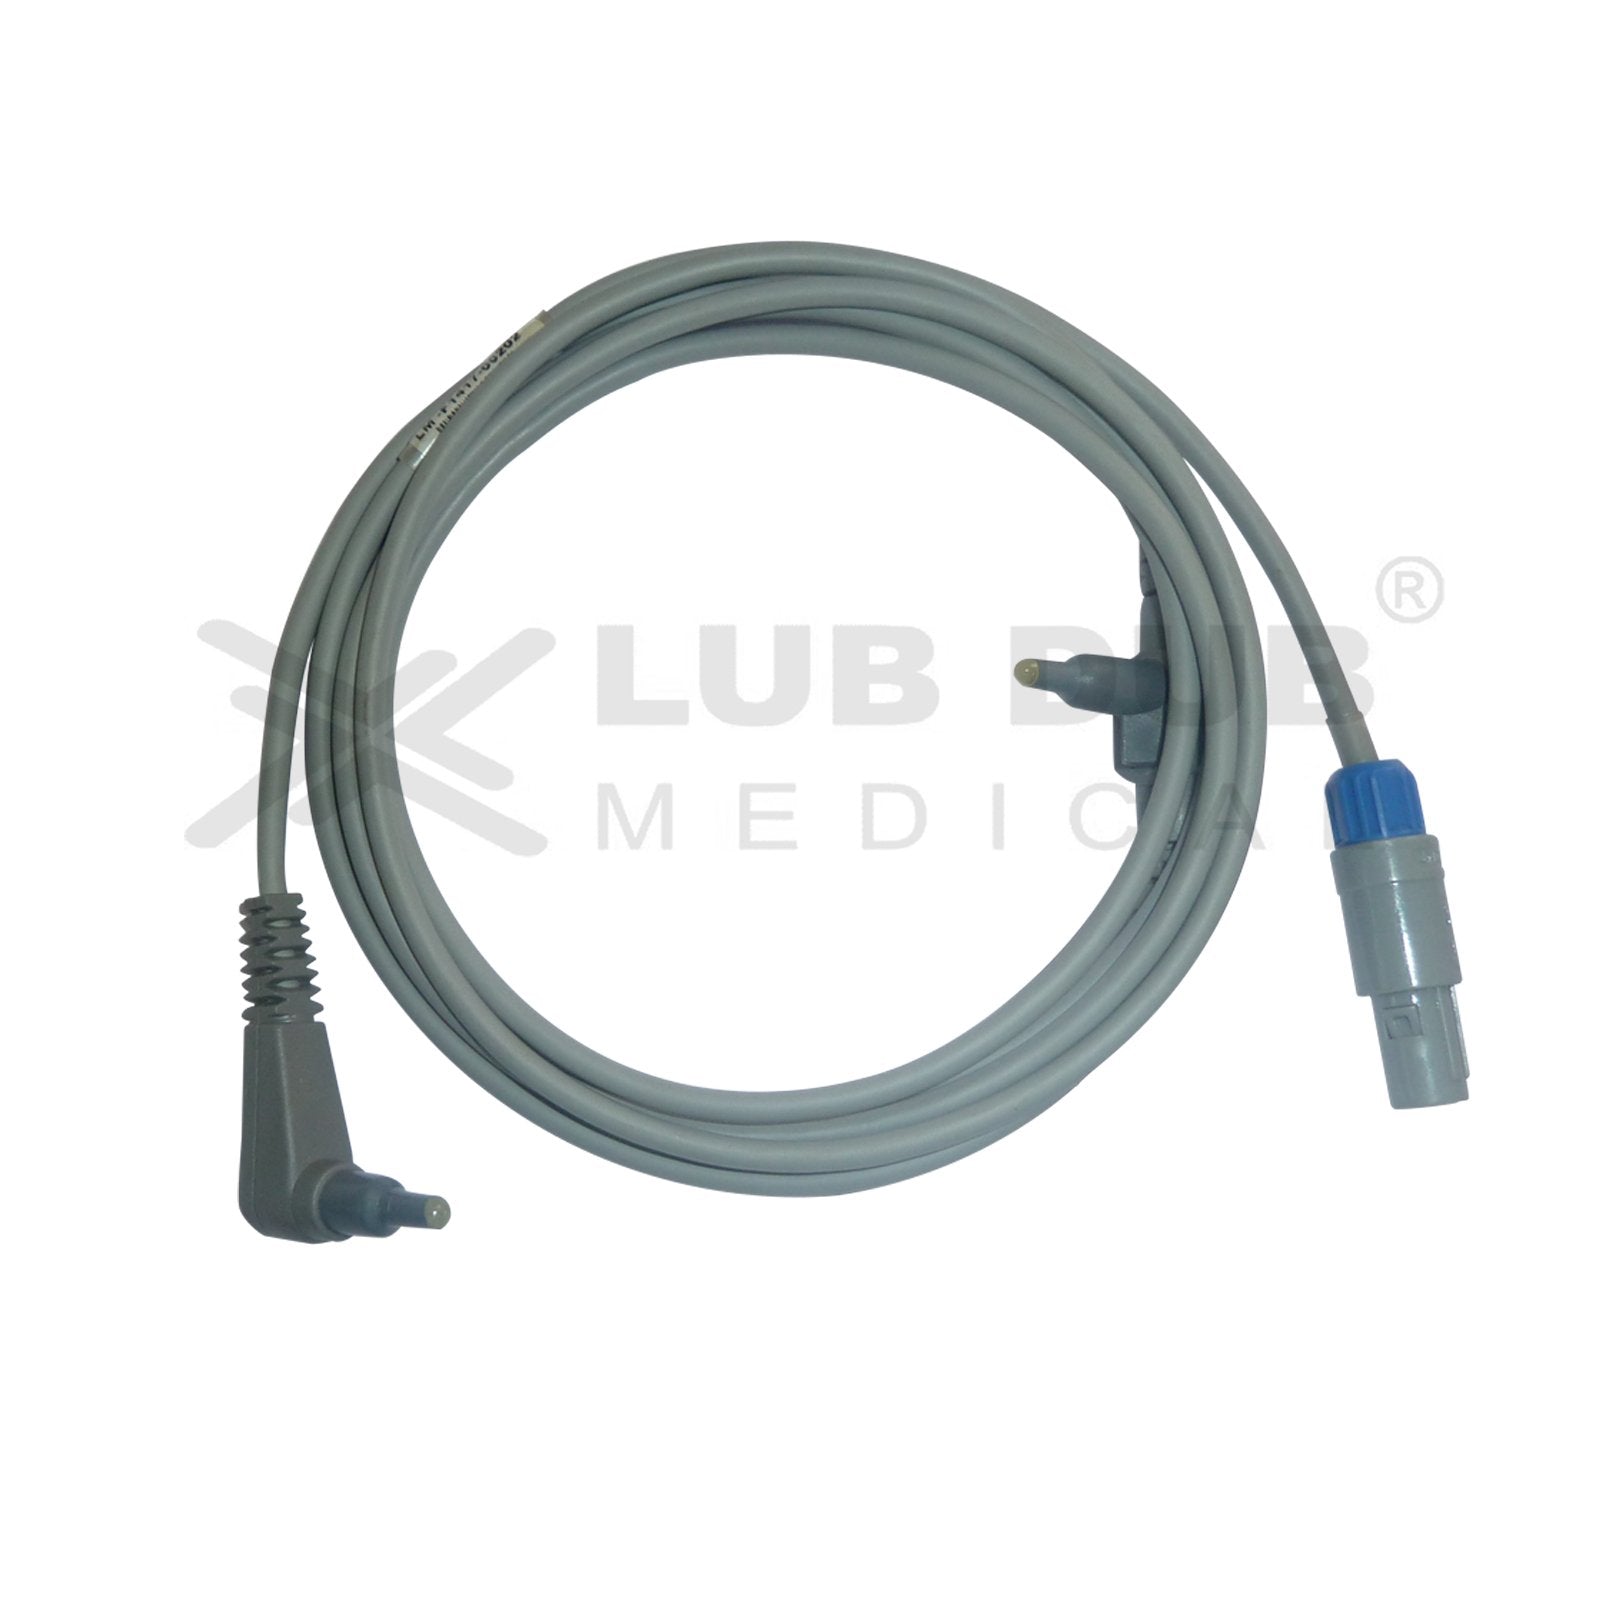 Temperature Probe for MR850 (For use w/ Circuits 1.5 M/60 IN in Length)